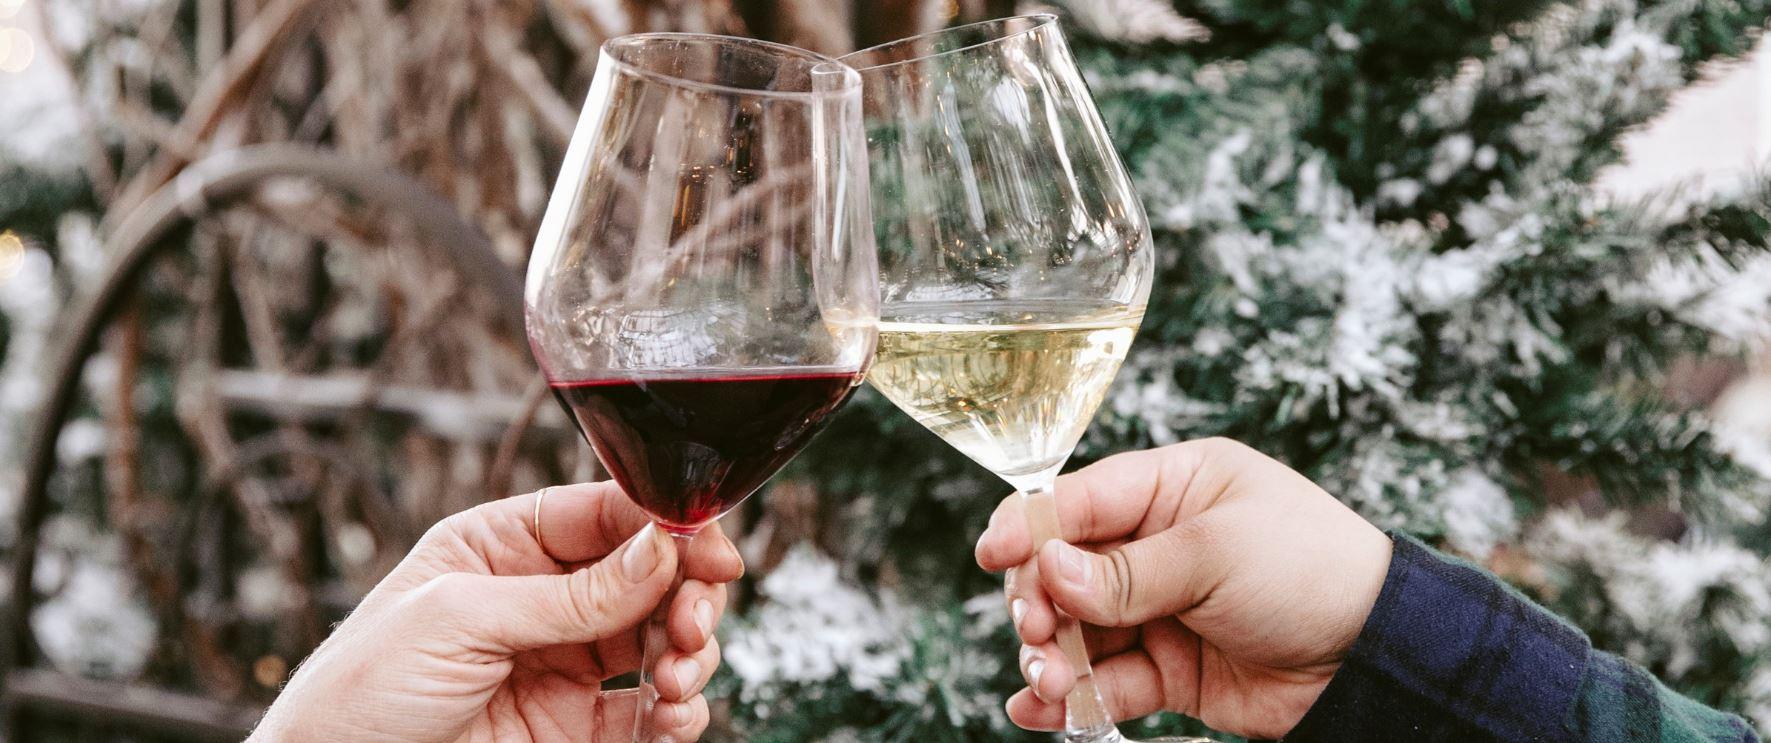 Sip & Savor: Stock up for the Holidays! A Wine Tasting Event